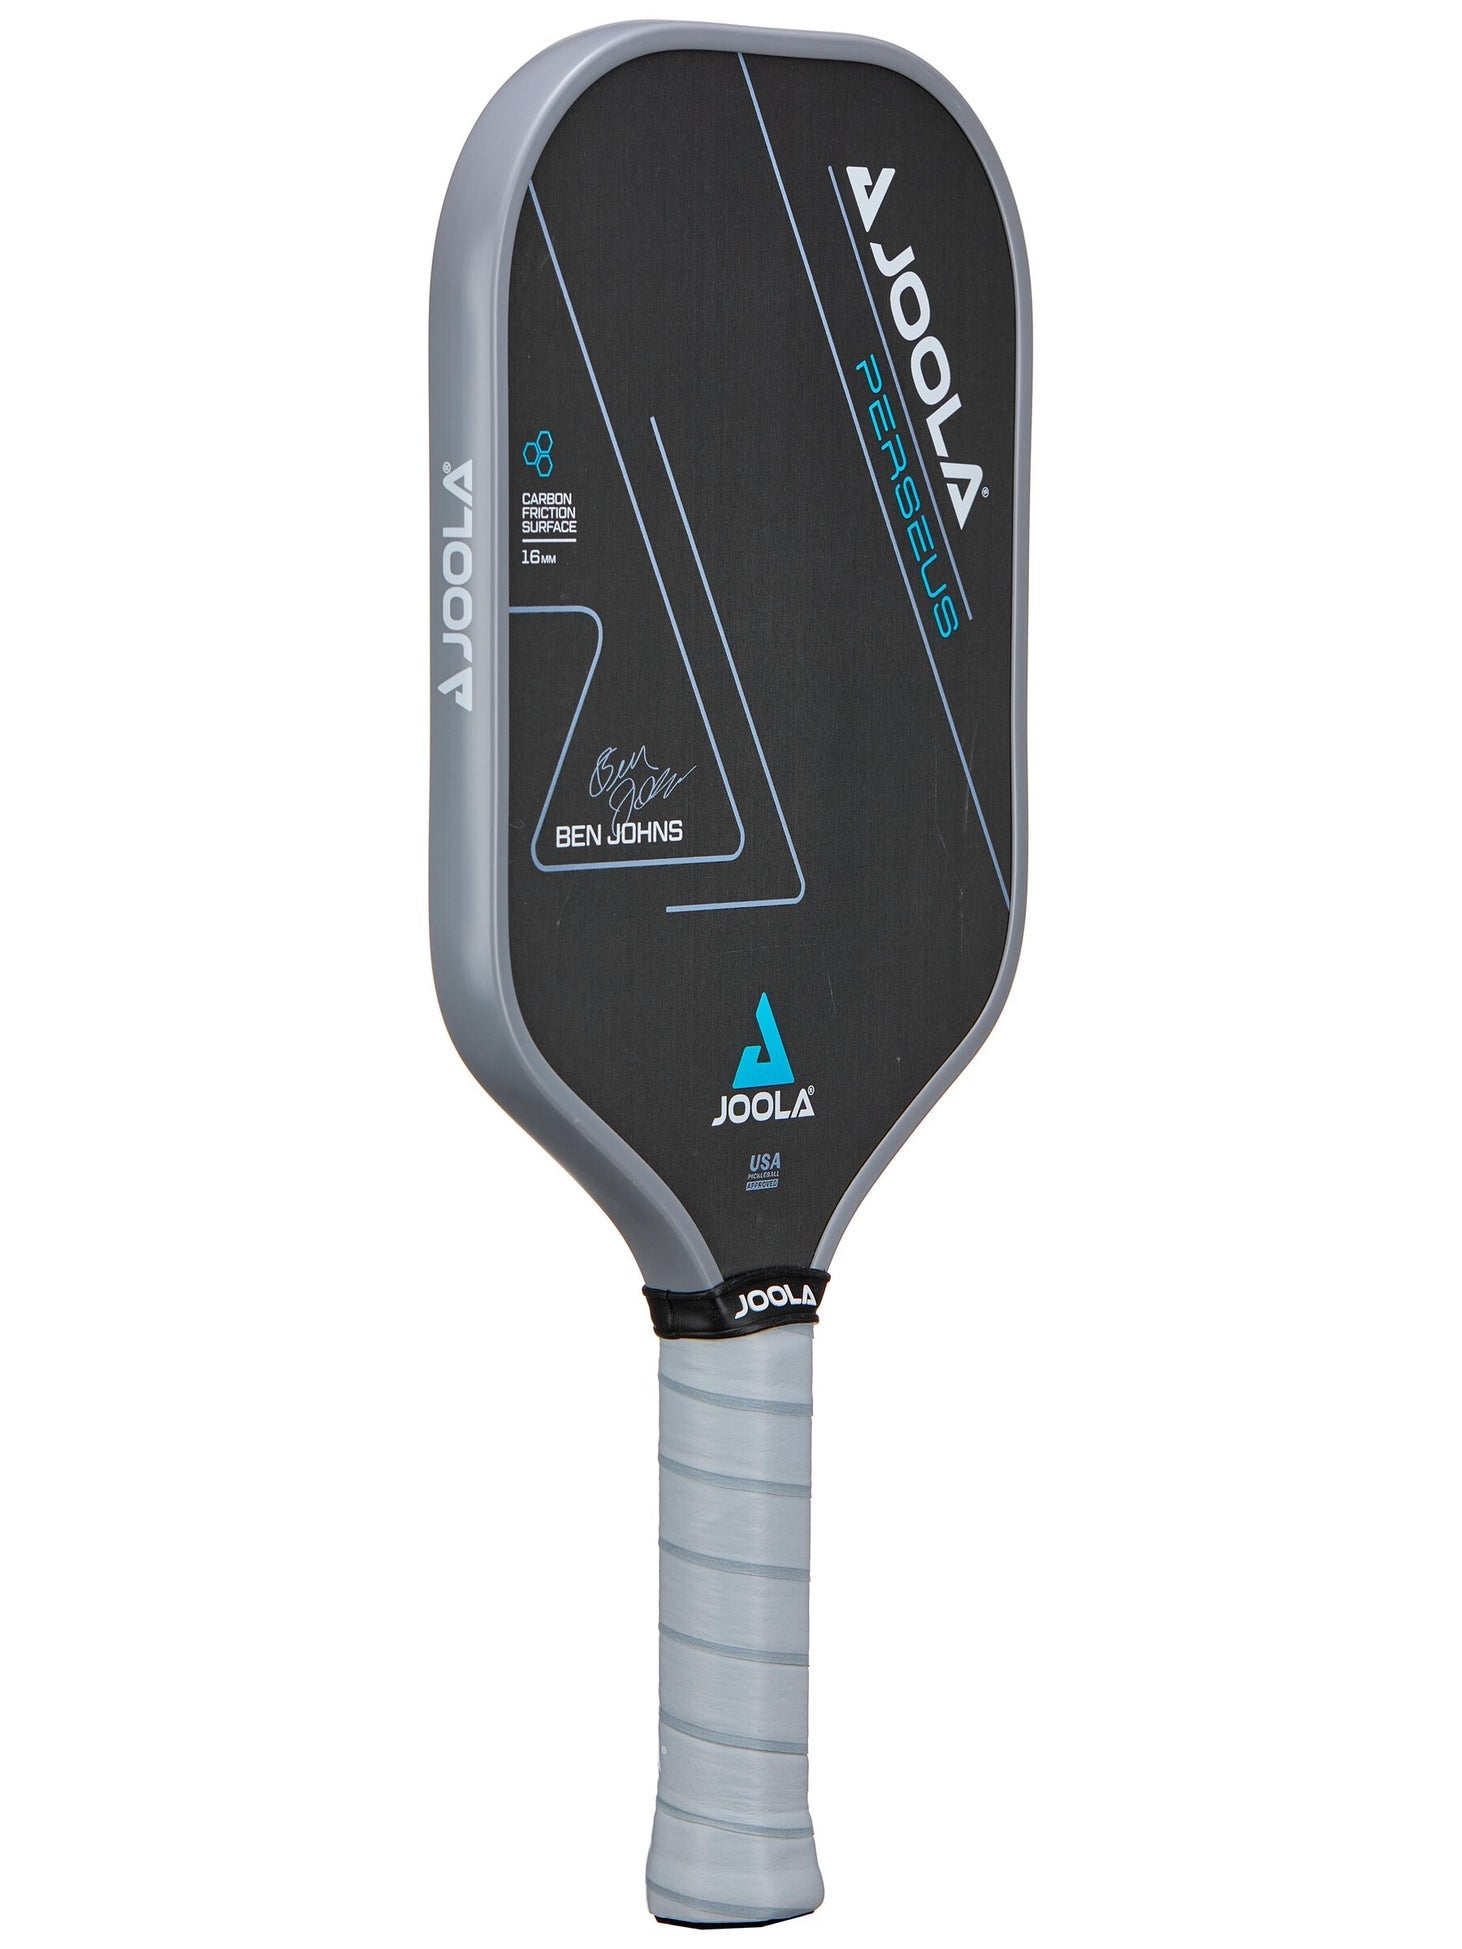 A JOOLA Ben Johns Perseus CFS 16mm Pickleball Paddle available at the pickleball store.